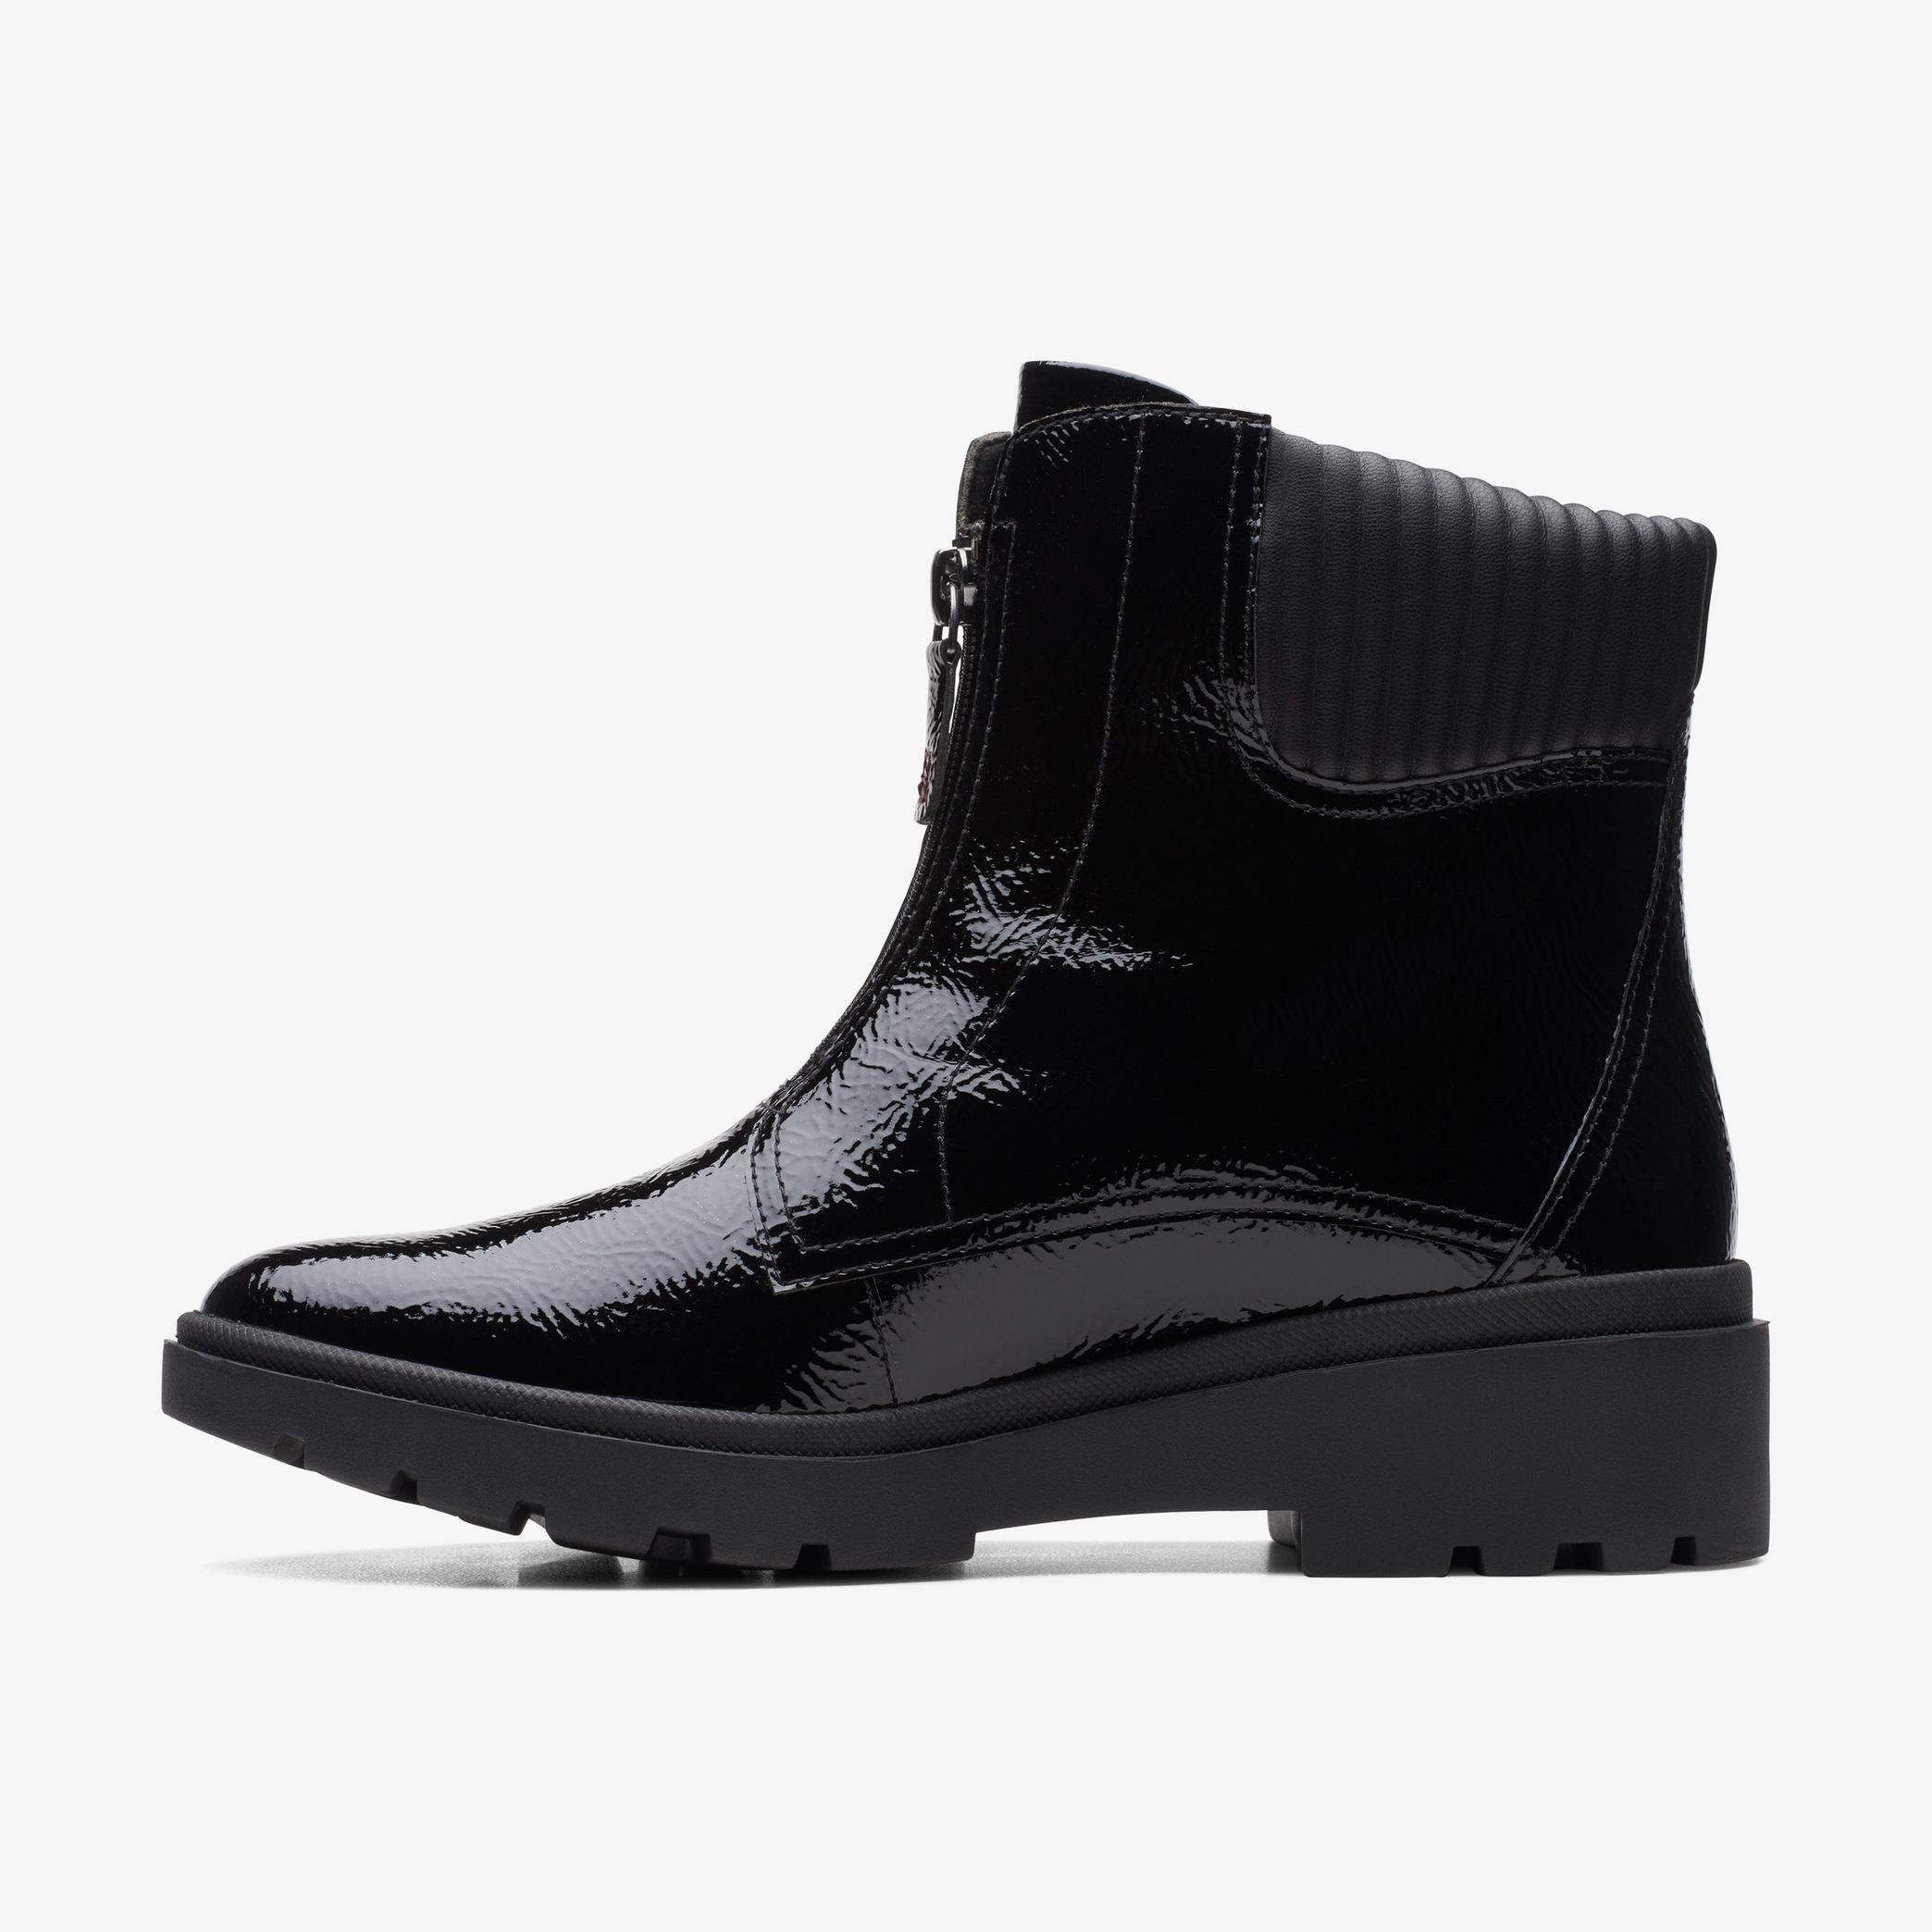 Calla Zip Black Crinkle Patent Ankle Boots, view 2 of 6